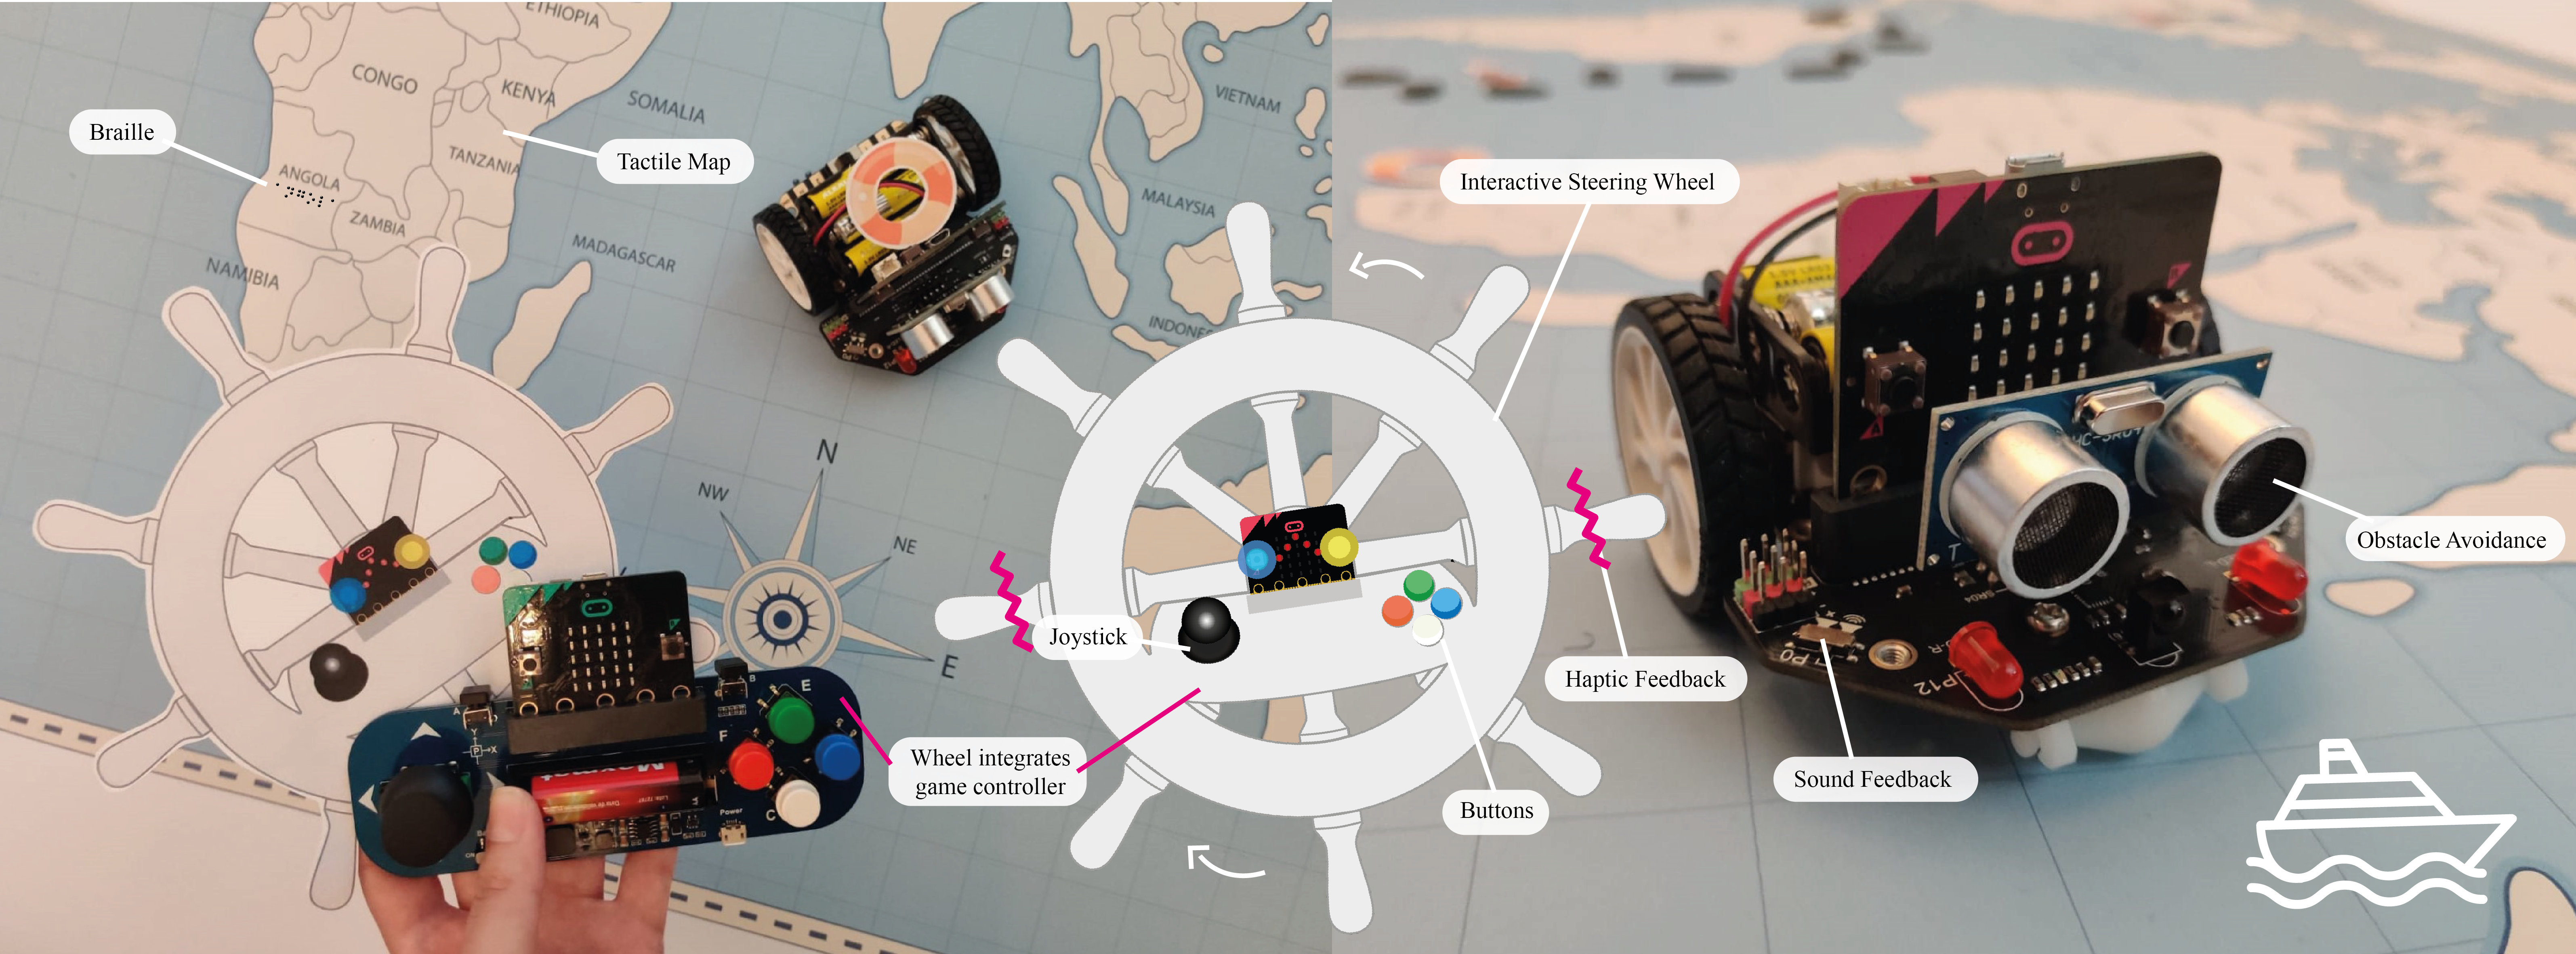 a playful environment designed from the ground up to be rich in both its story (a nautical game) and its mechanics (e.g., a physical robot-boat controlled with a 3D printed wheel), tailored to promote computational thinking